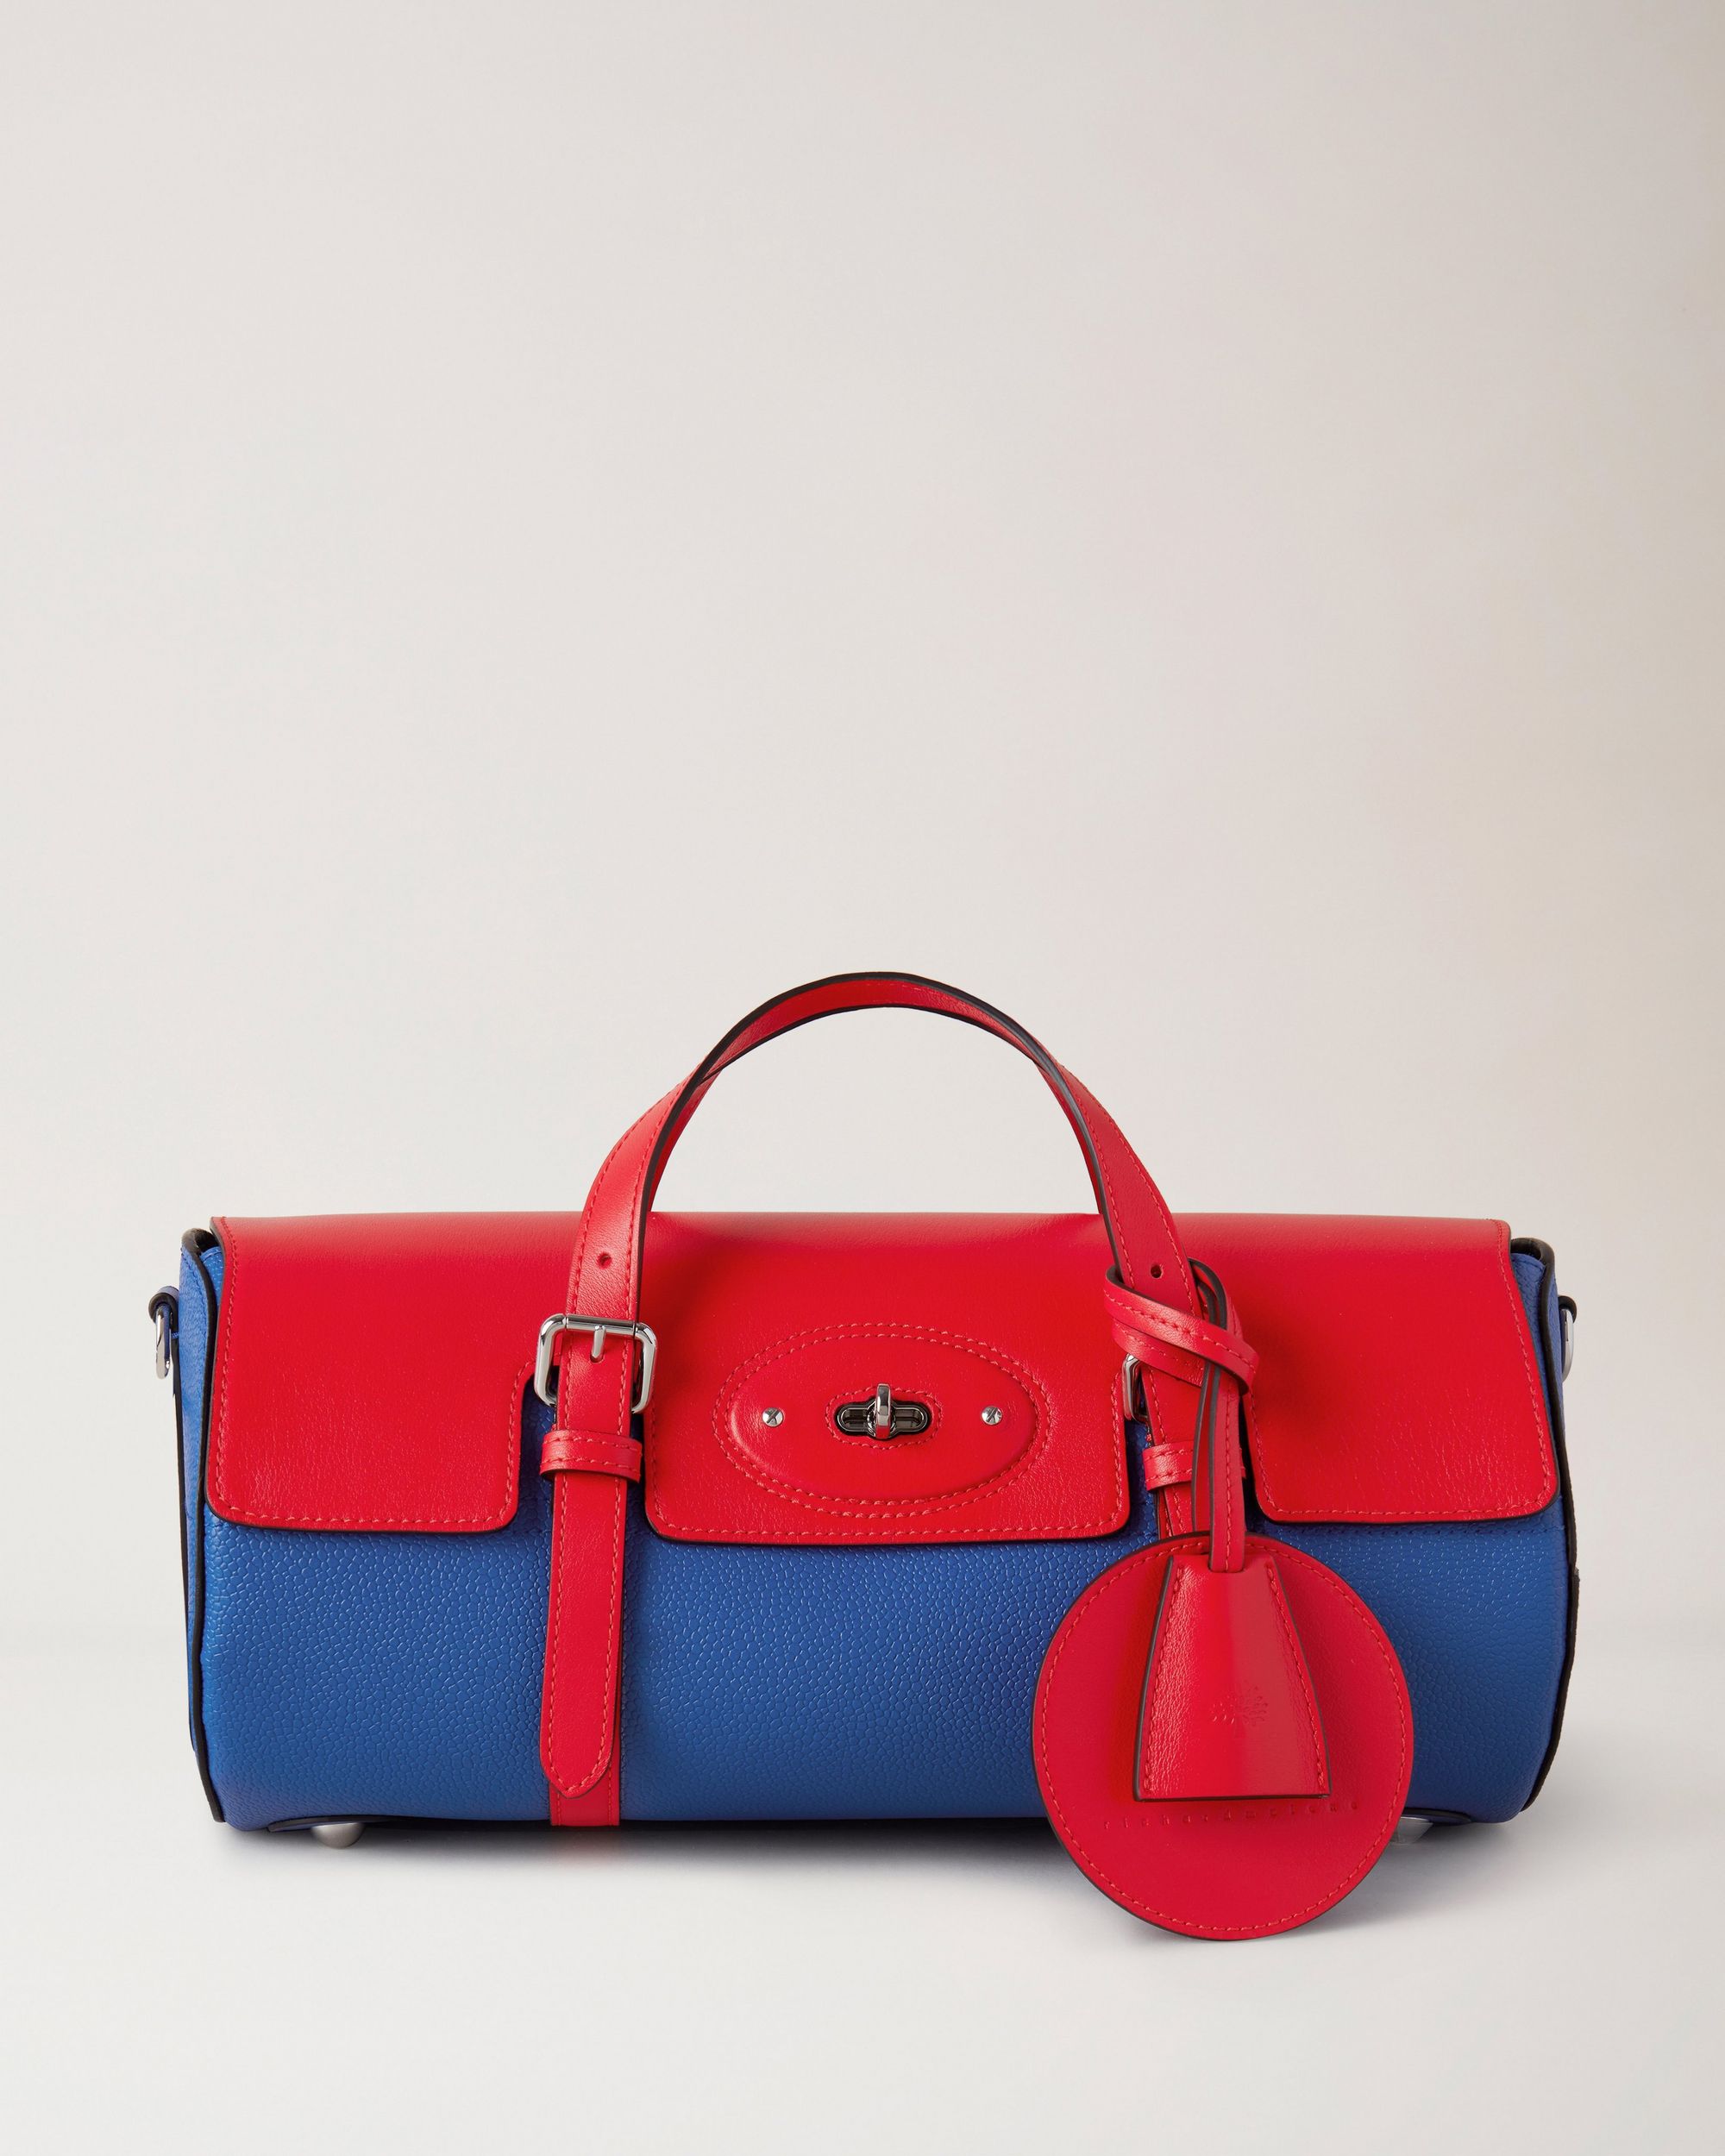 Red and blue luxury gym bag